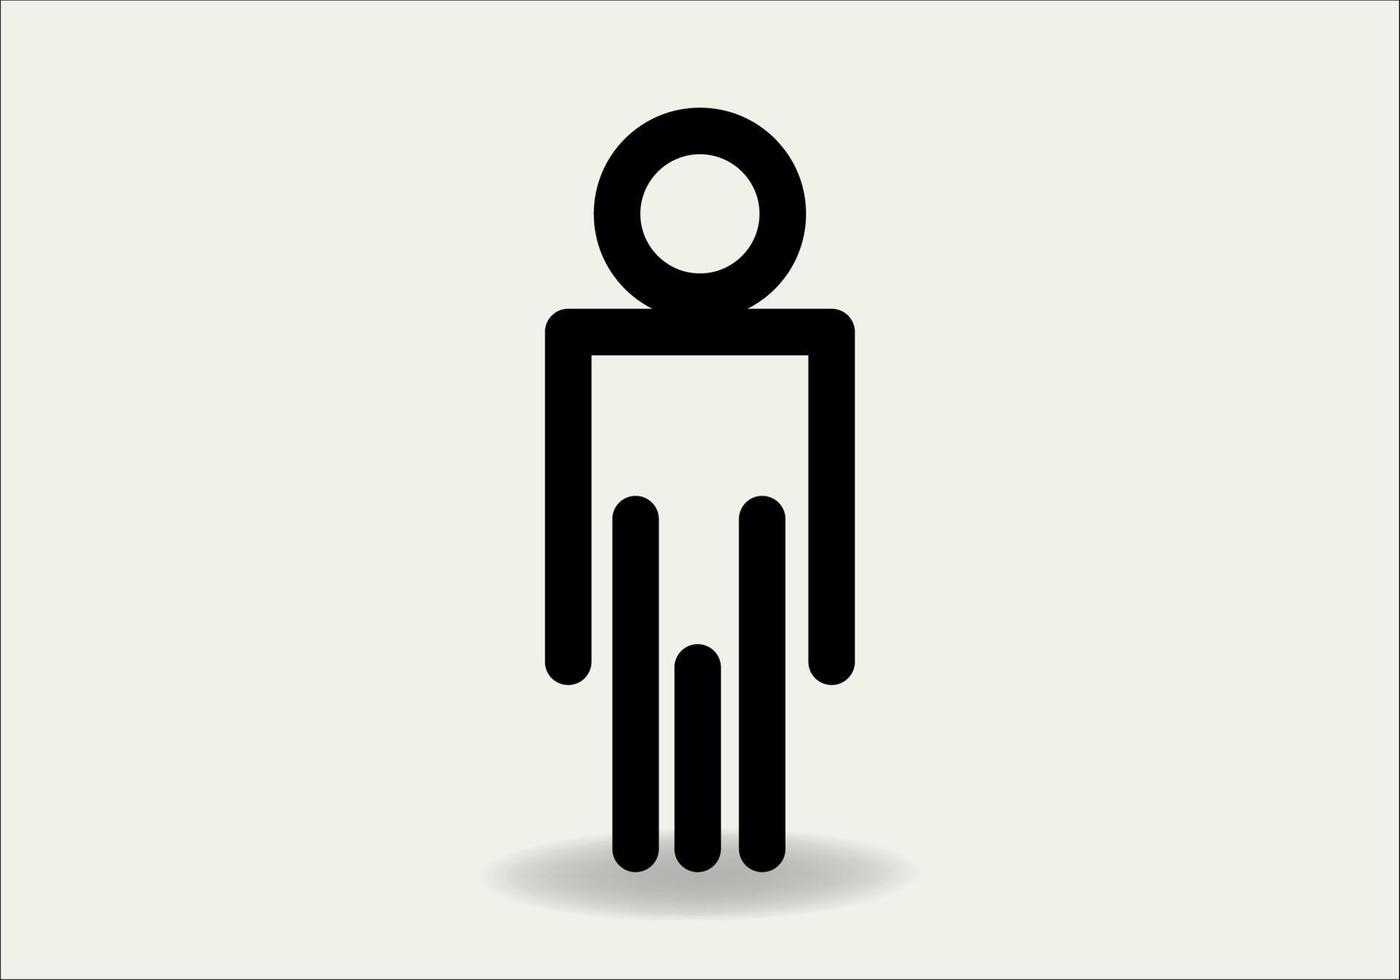 Man Icon Illustration. Flat simple grey symbol on white background with shadow vector